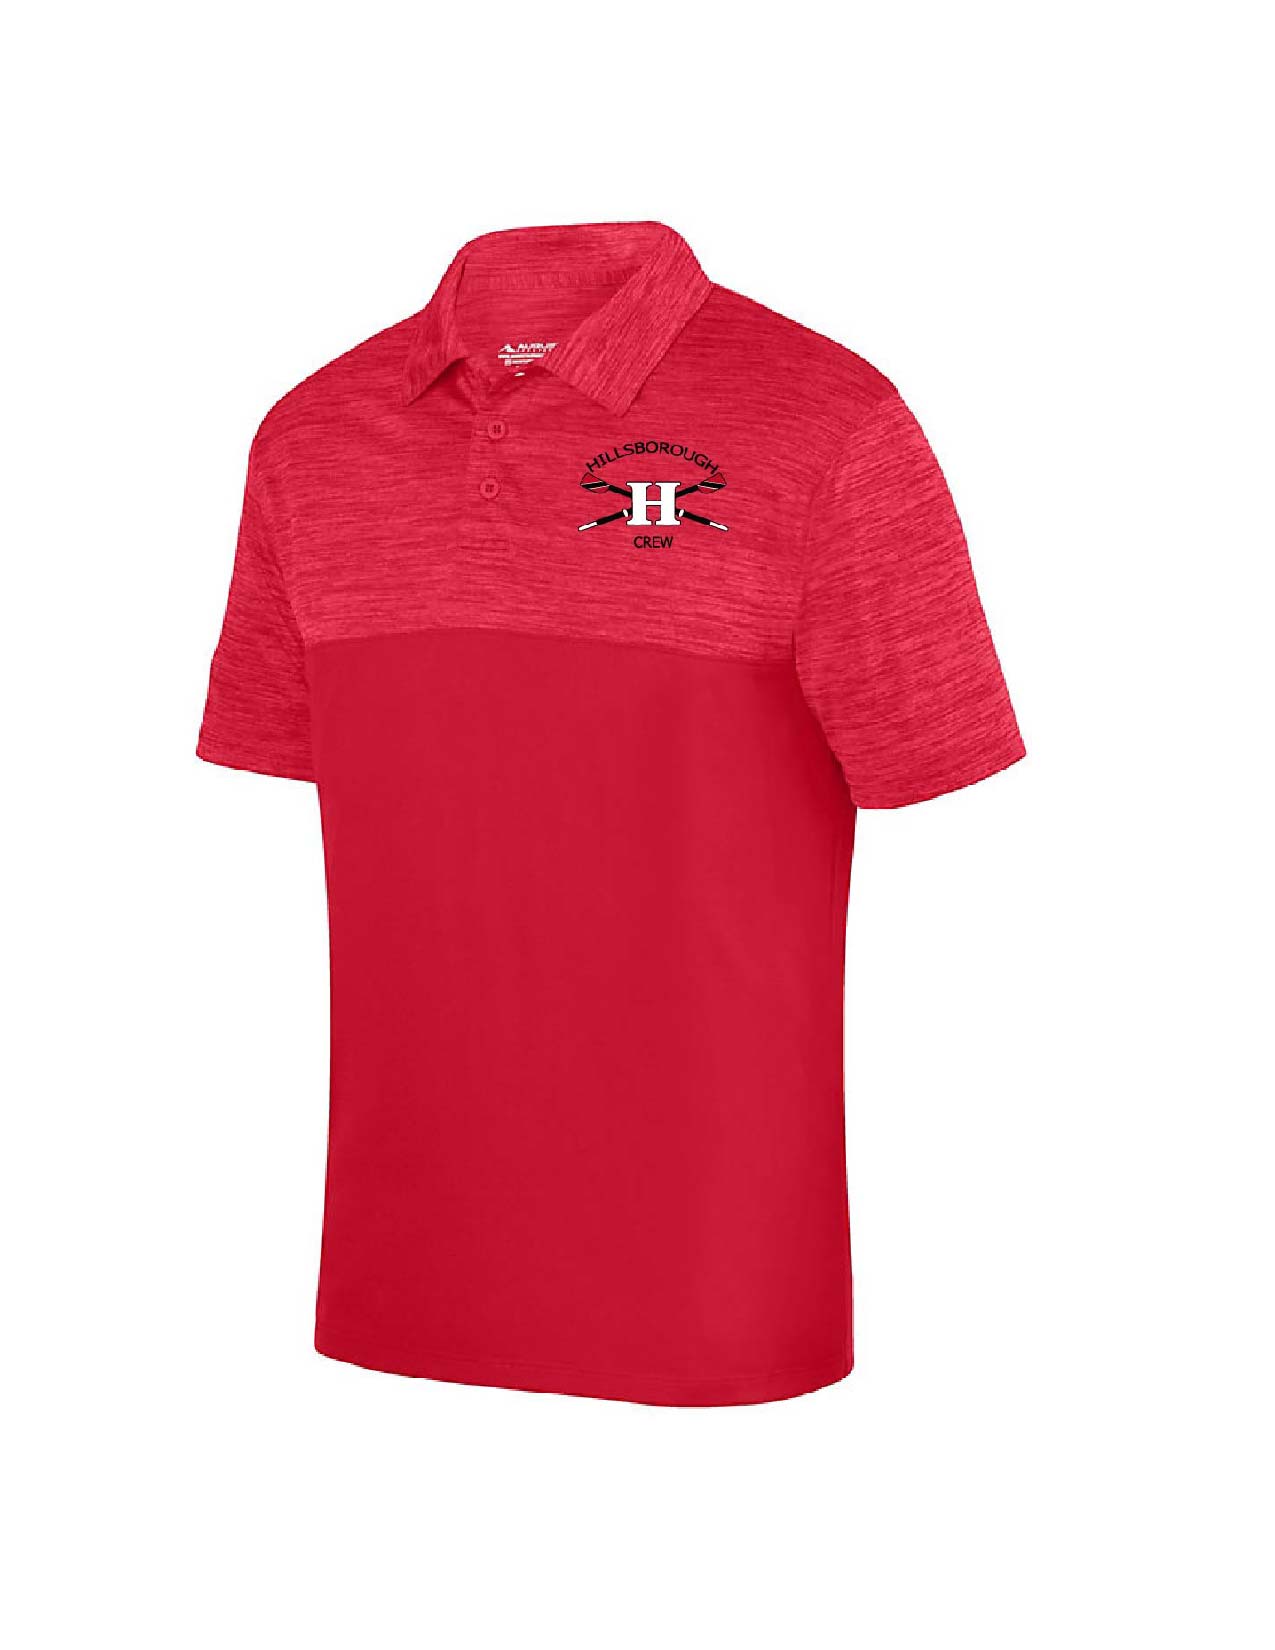 V - HHS Rowing Mens Dri Fit Polo